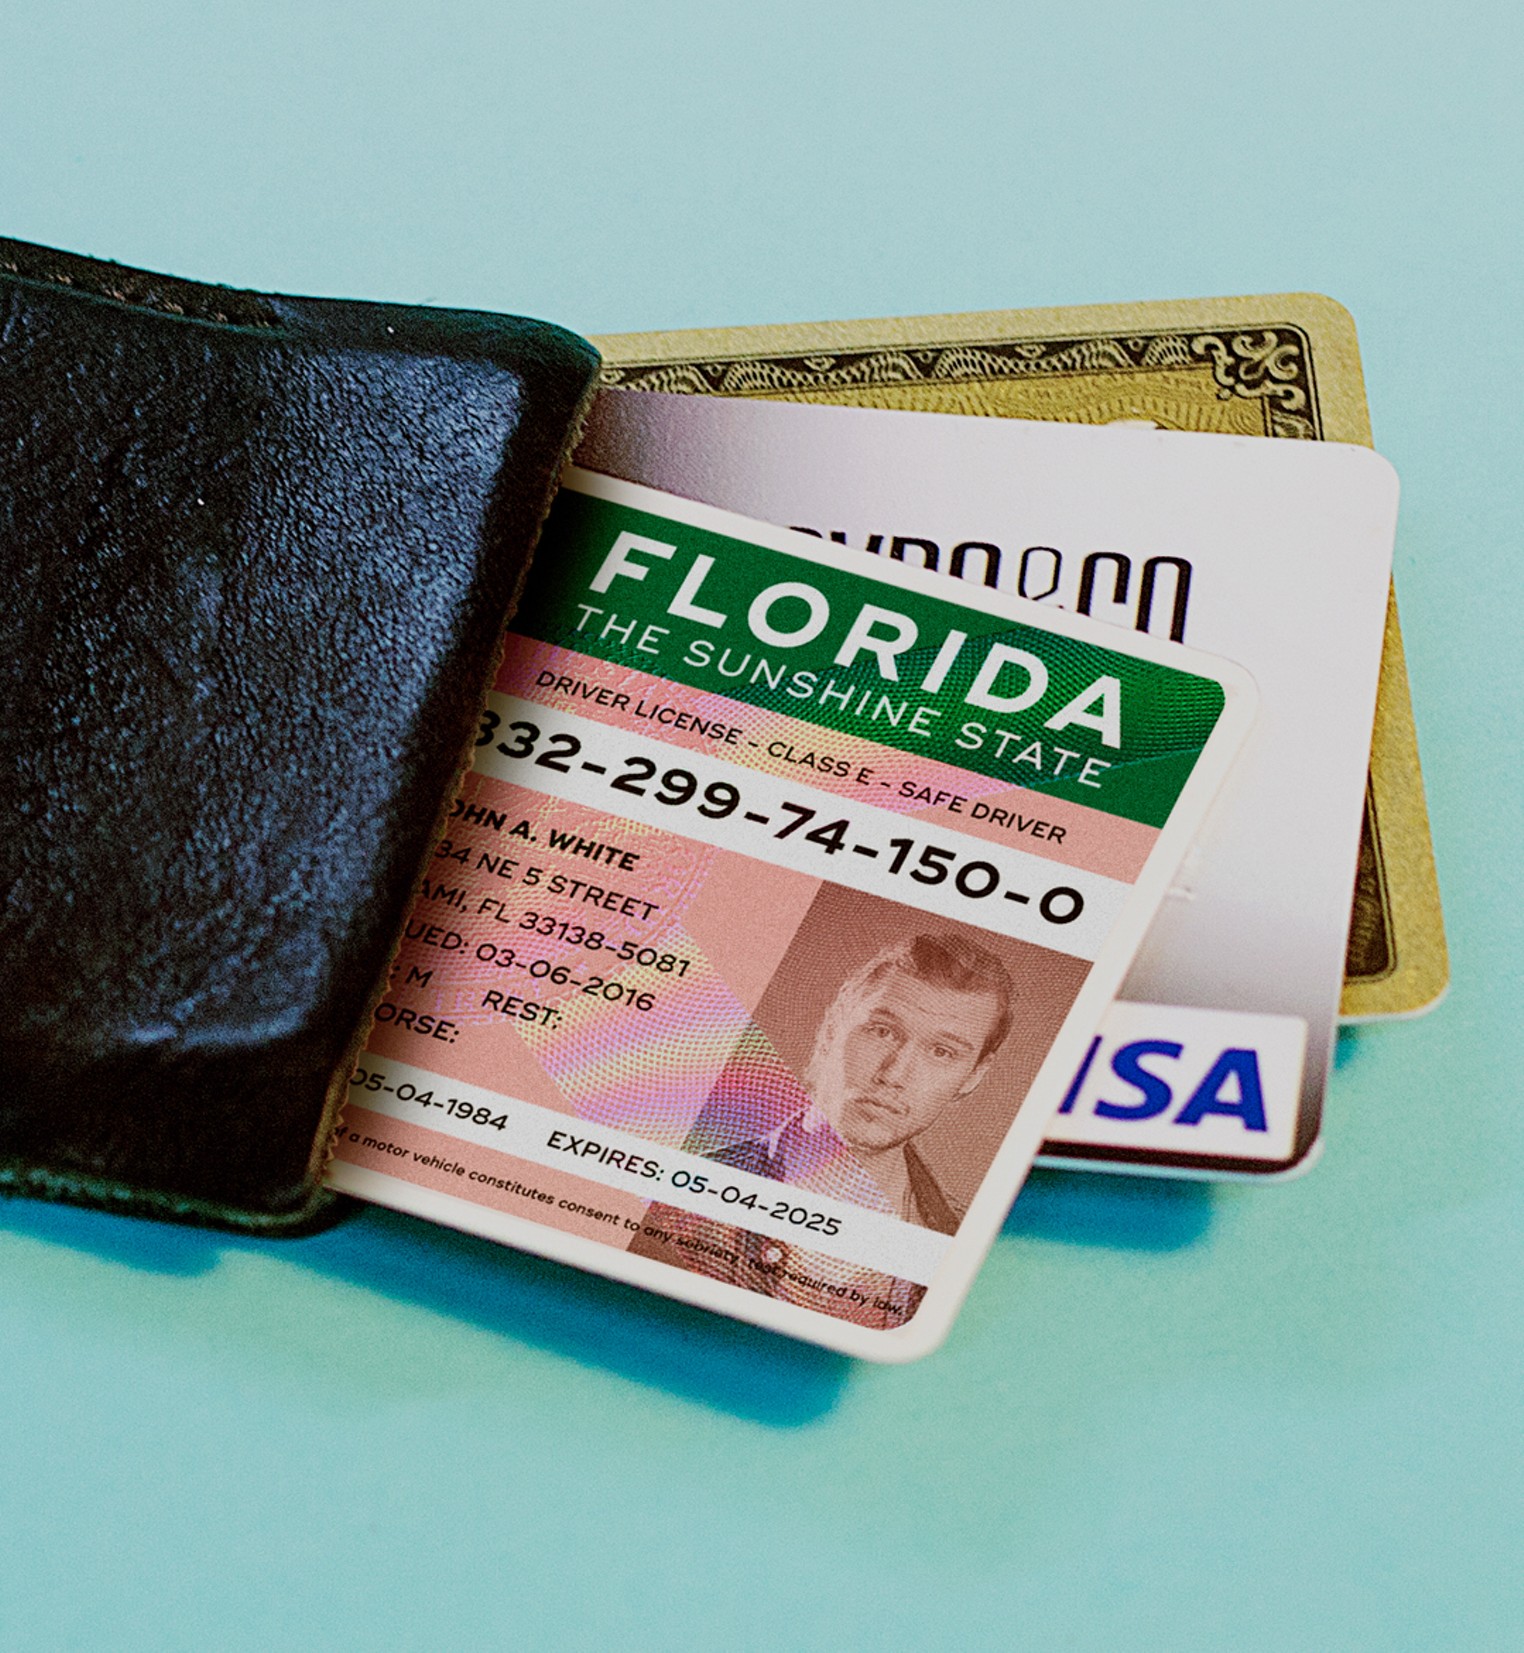 Coming Soon: Florida's NEW Driver License and ID Card